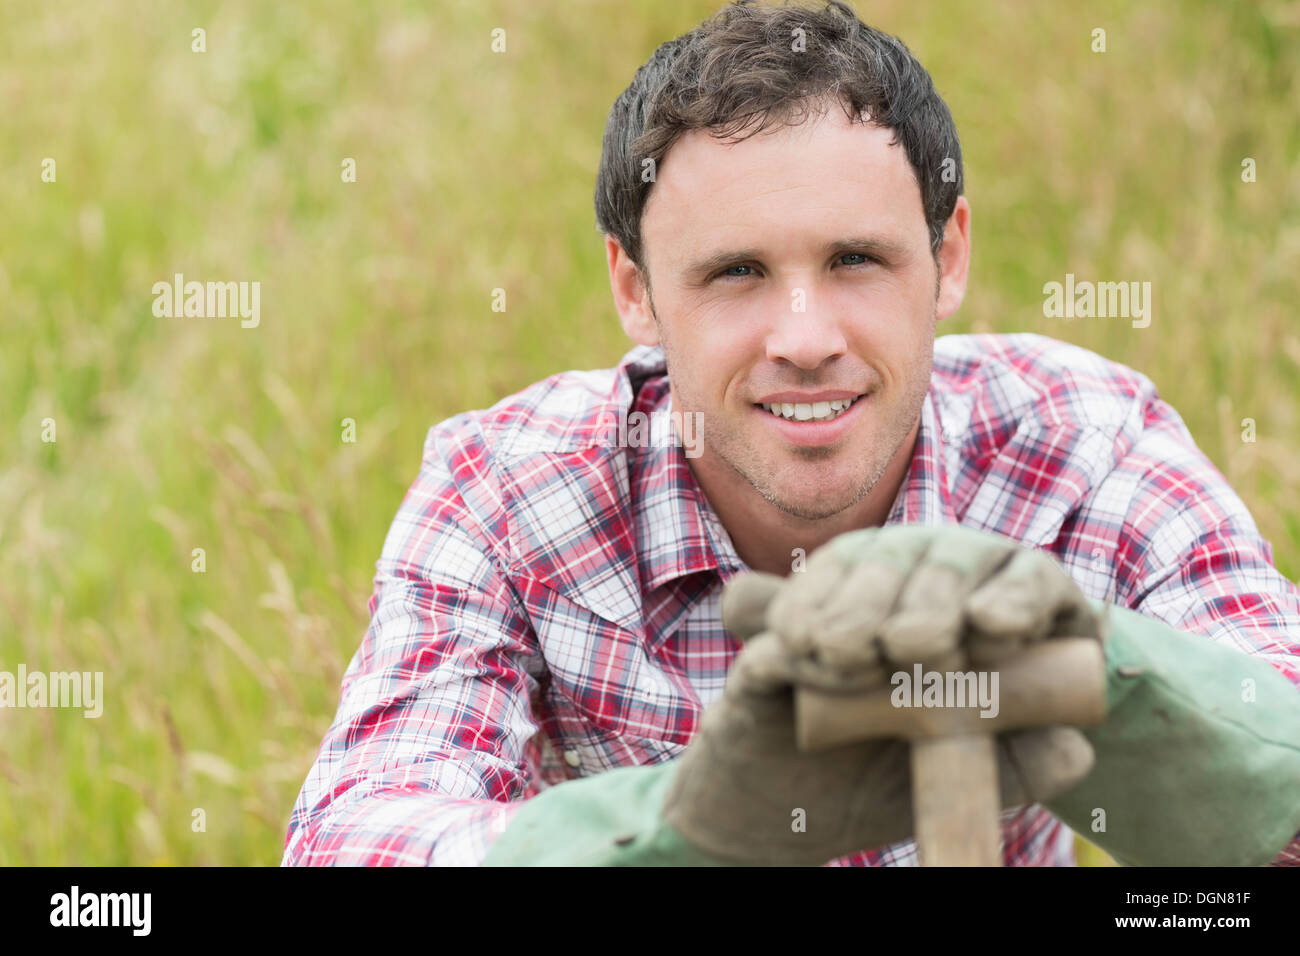 Handsome young man leaning on his shovel Stock Photo